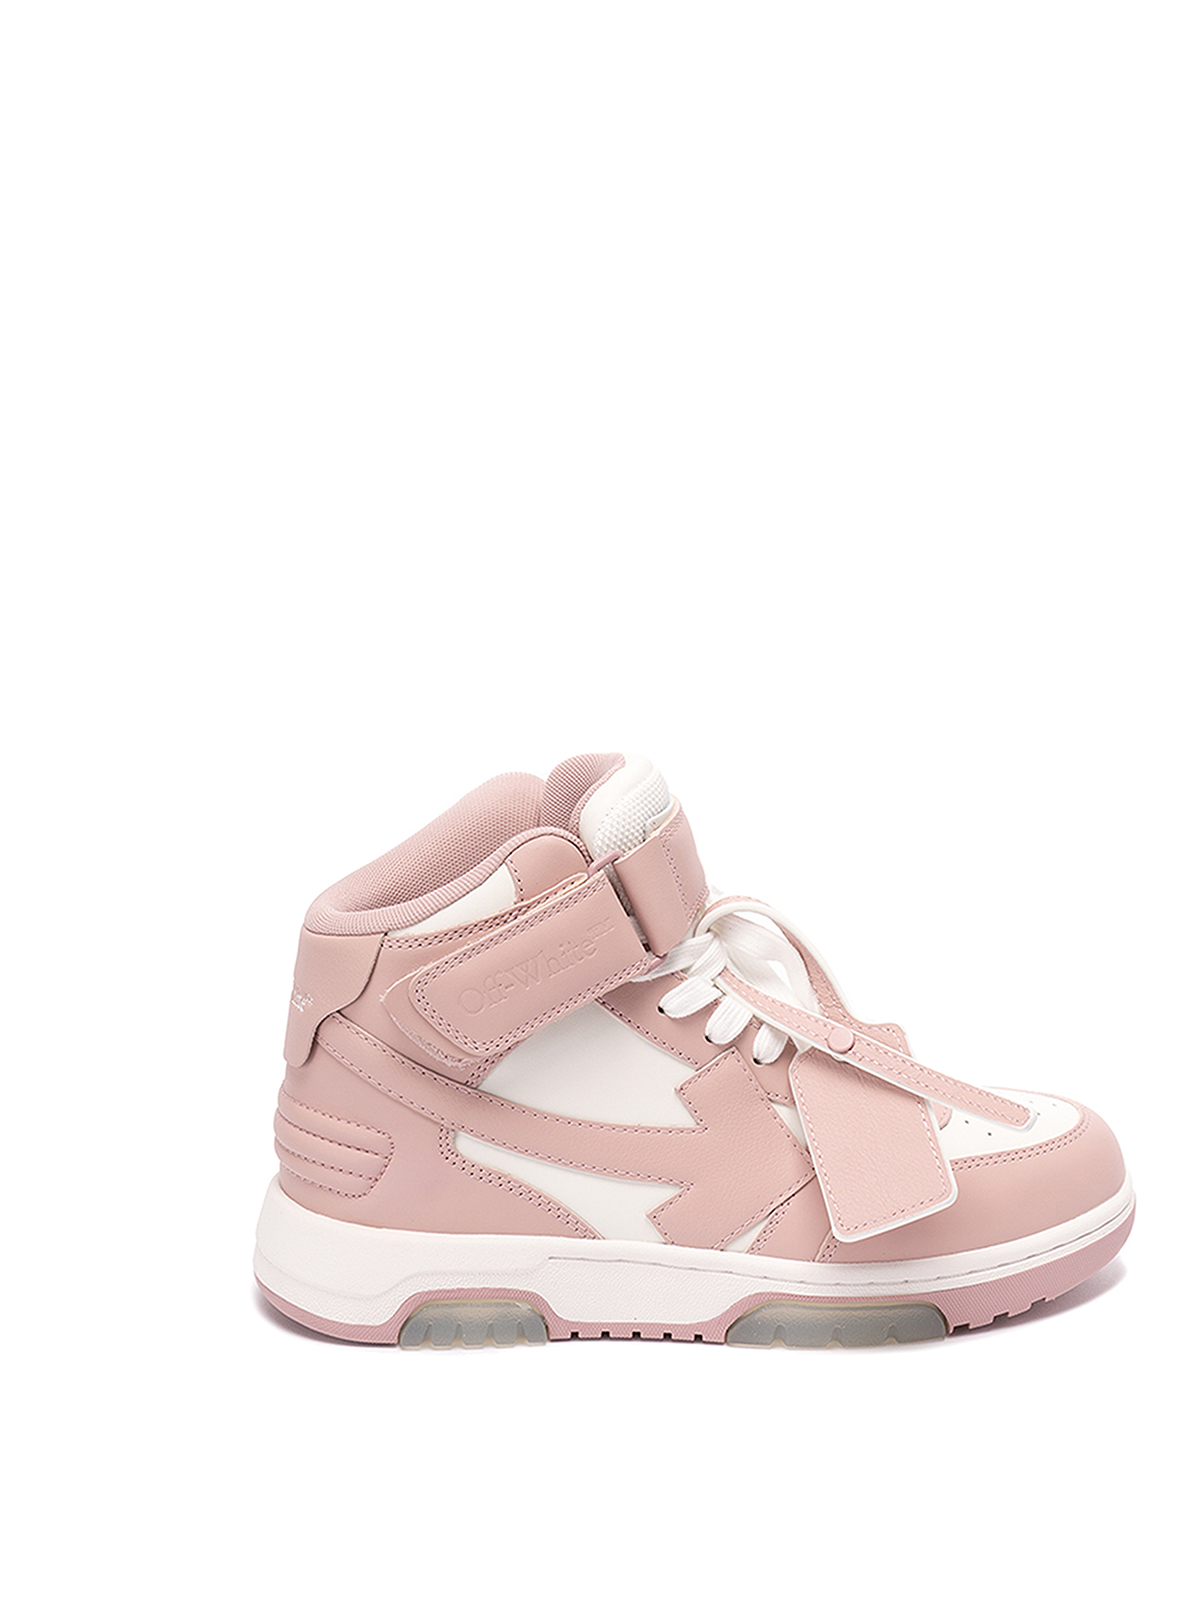 OFF-WHITE `OUT OF OFFICE MID TOP LEATHER` SNEAKERS